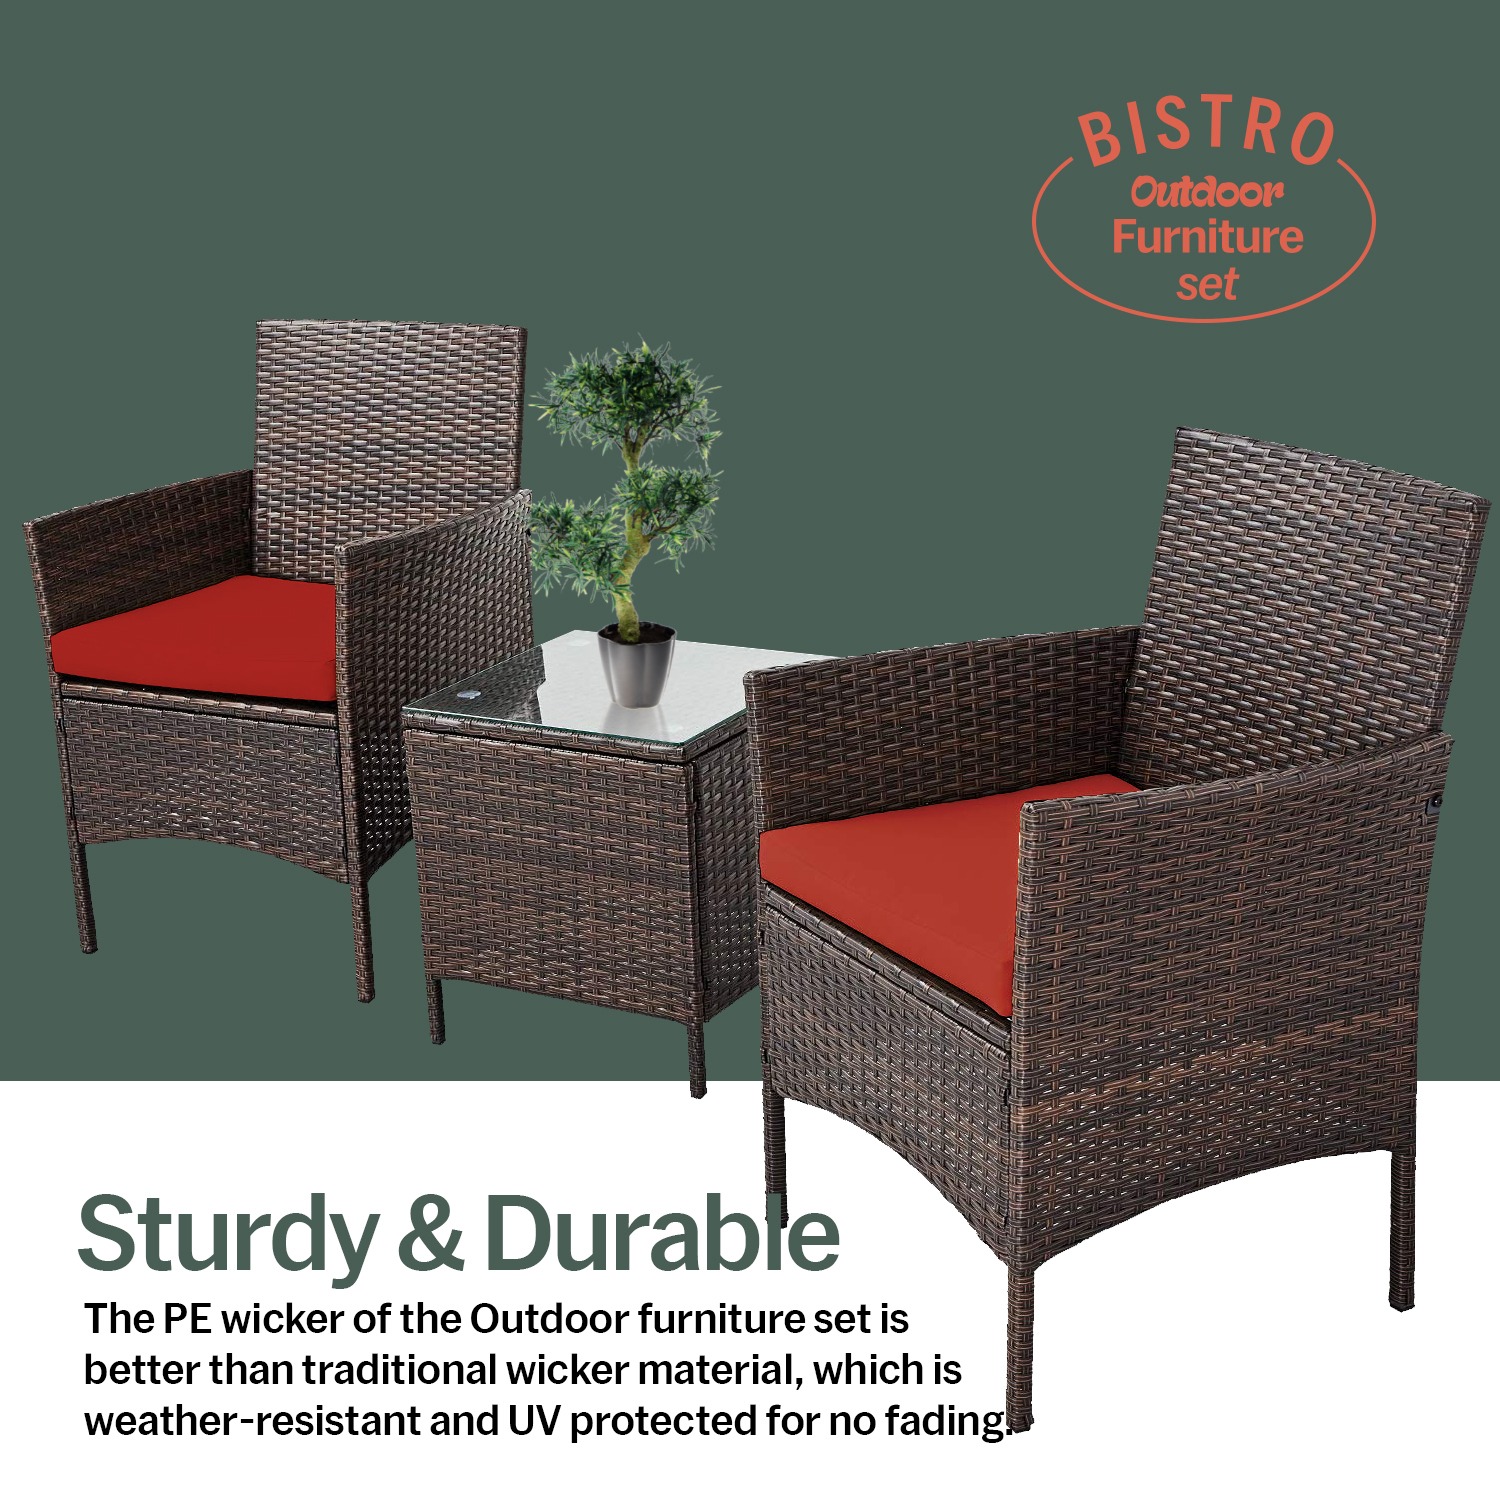 Zoey 3 Piece Stylish Design Rattan Furniture Set – 2 Relaxing Soft Cushion Chairs With a Cafe Table - Red - image 3 of 10